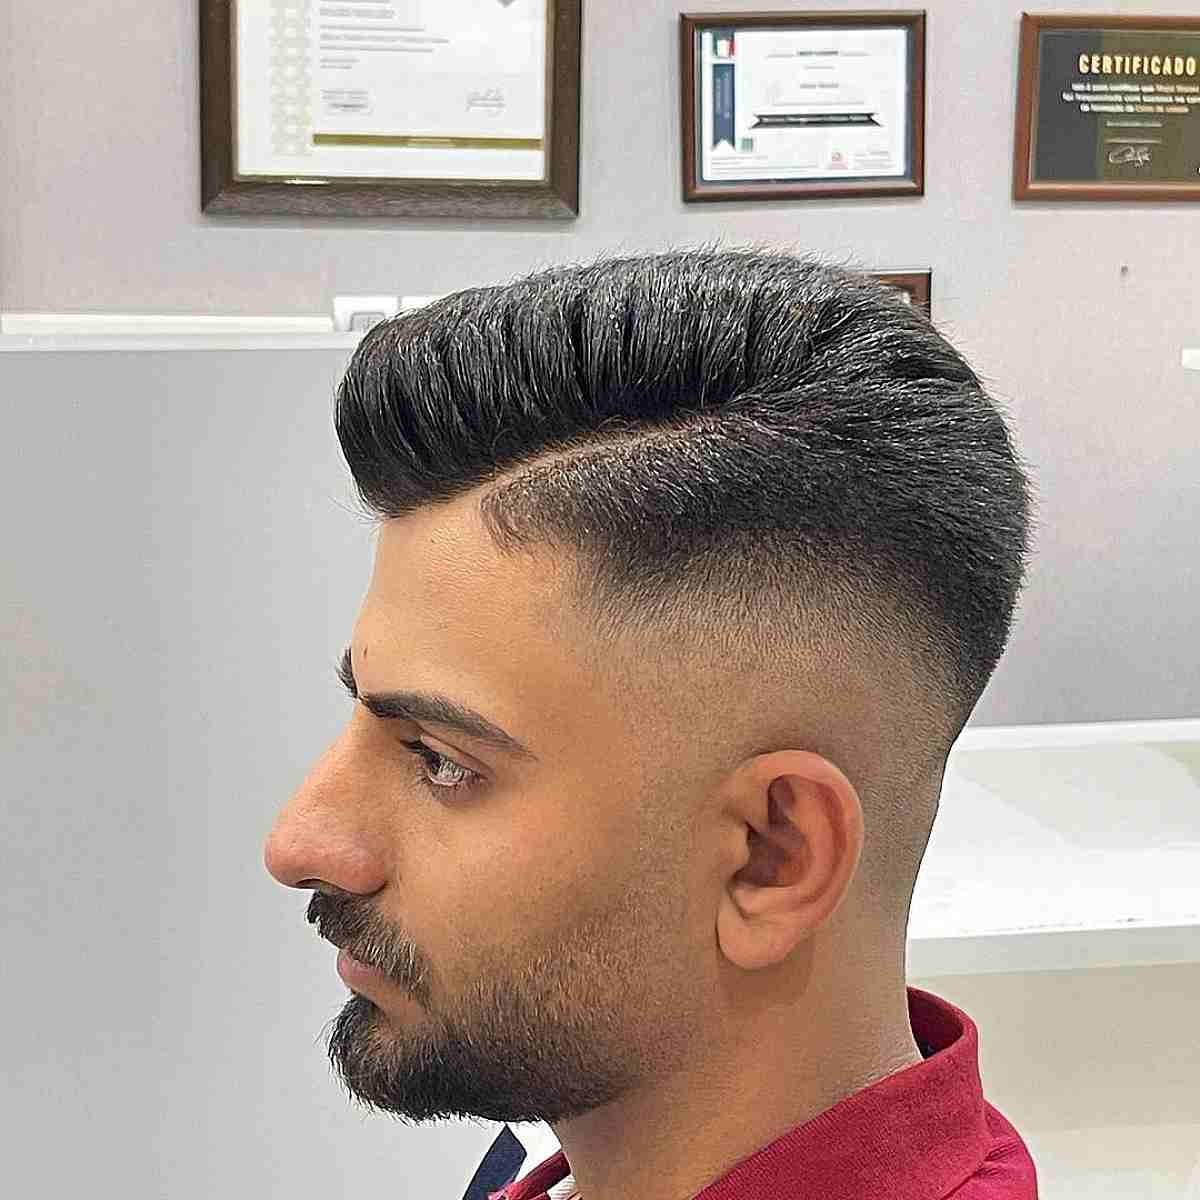 Aggregate 86+ front side hairstyle video latest - in.eteachers